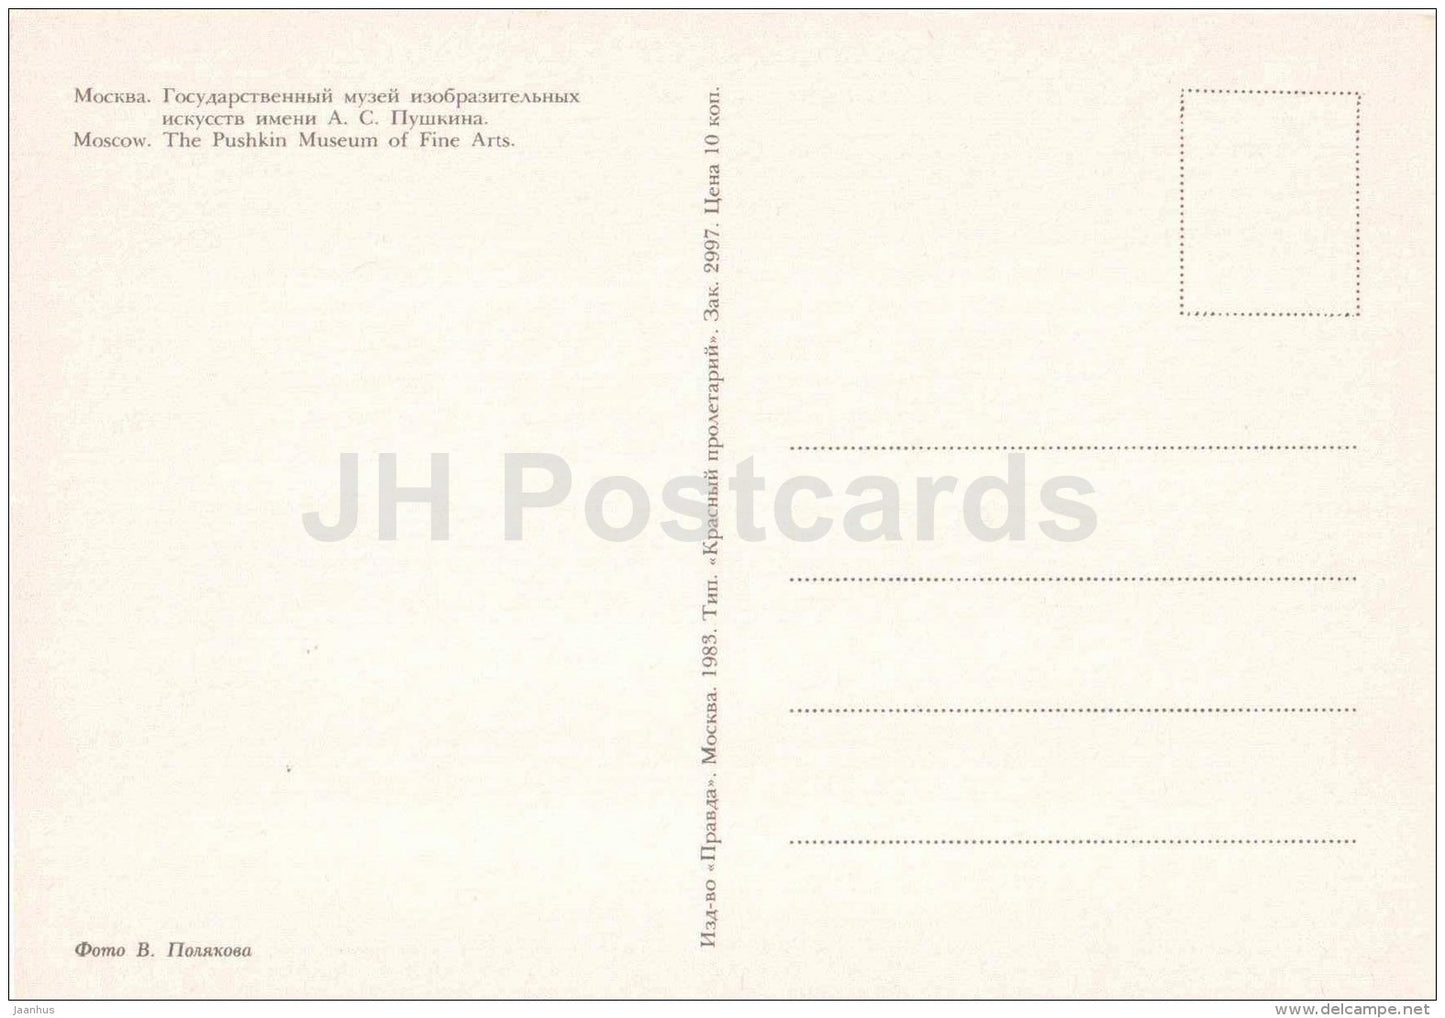 The Pushkin Museum of Fine Arts  - Moscow - 1983 - Russia USSR - unused - JH Postcards